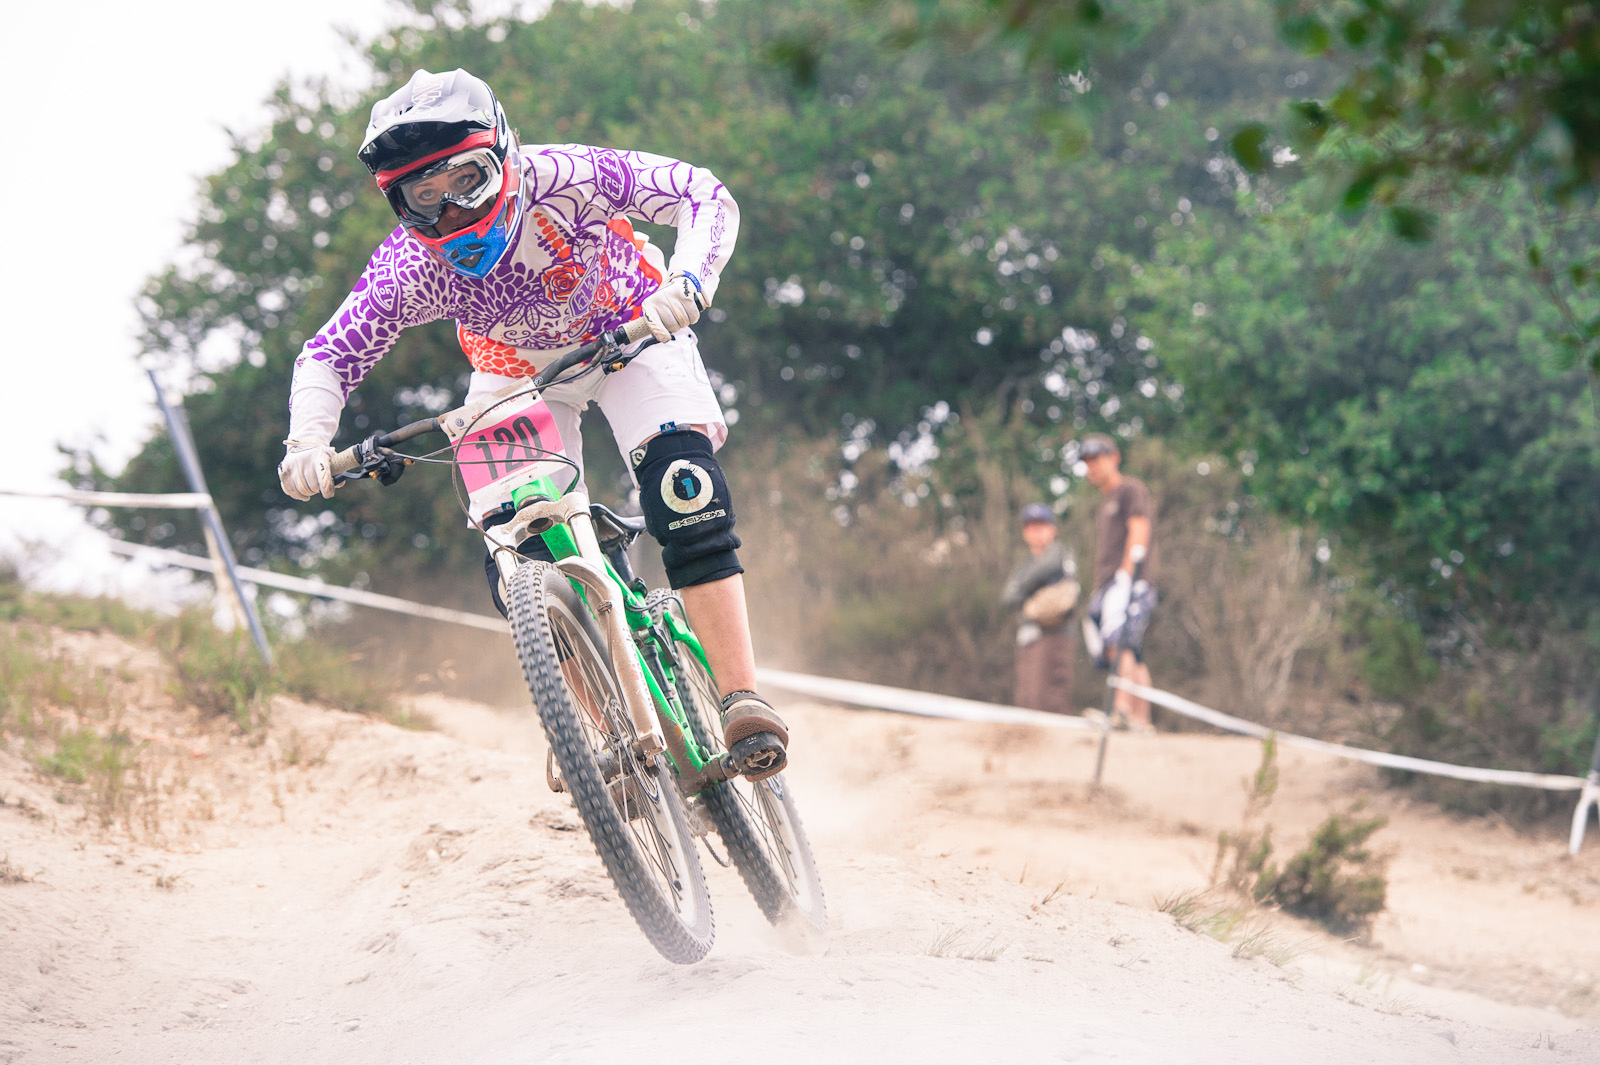 Holly Feniak is racing against the big girls this year, and she's starting it off right. First Sea Otter DH, and first Sea Otter DH podium, 5th place.